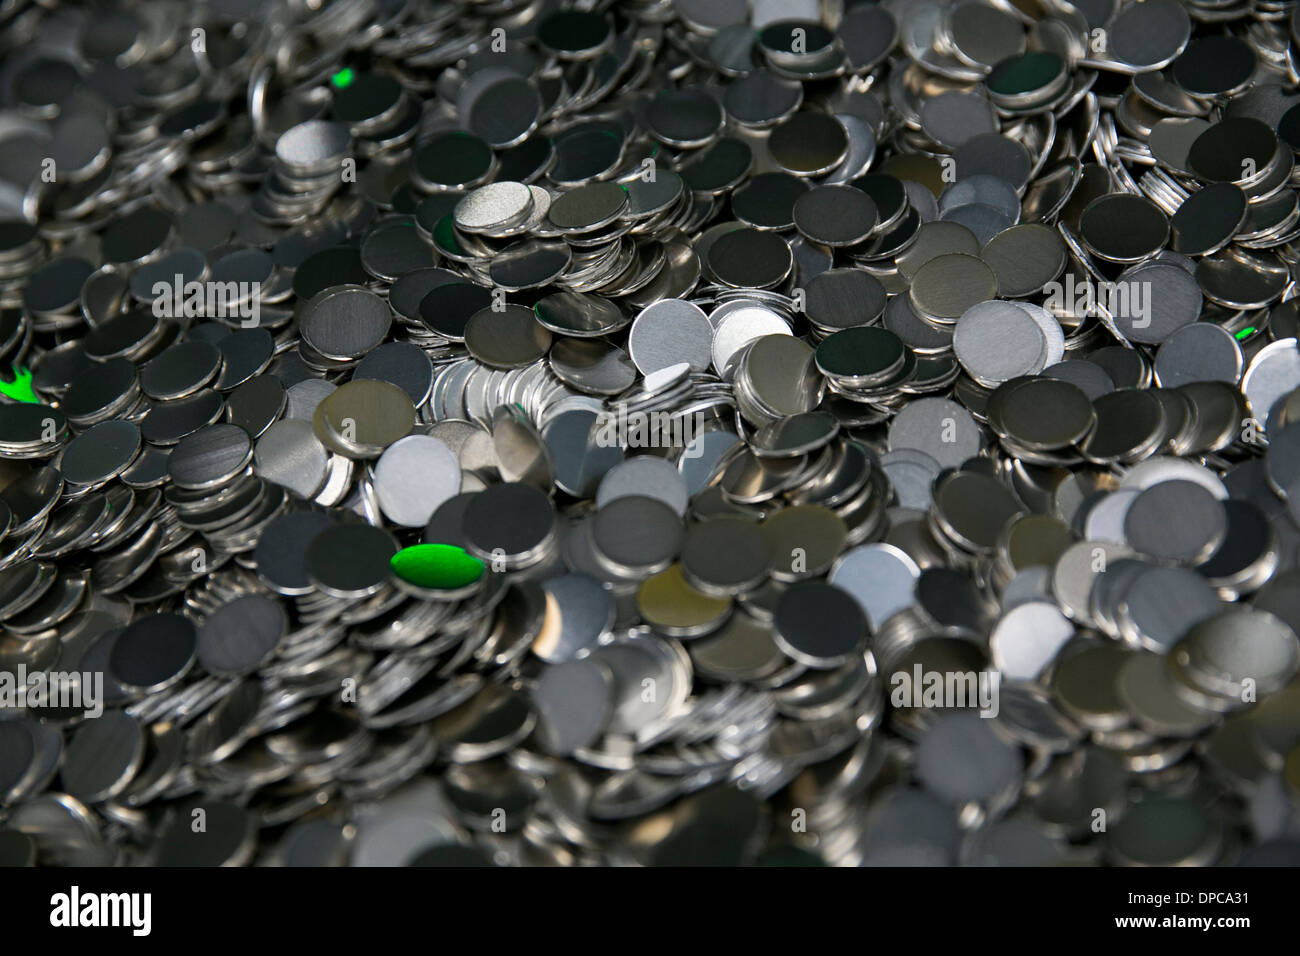 Quarter manufacturing at the Philadelphia branch of the United States Mint.  Stock Photo